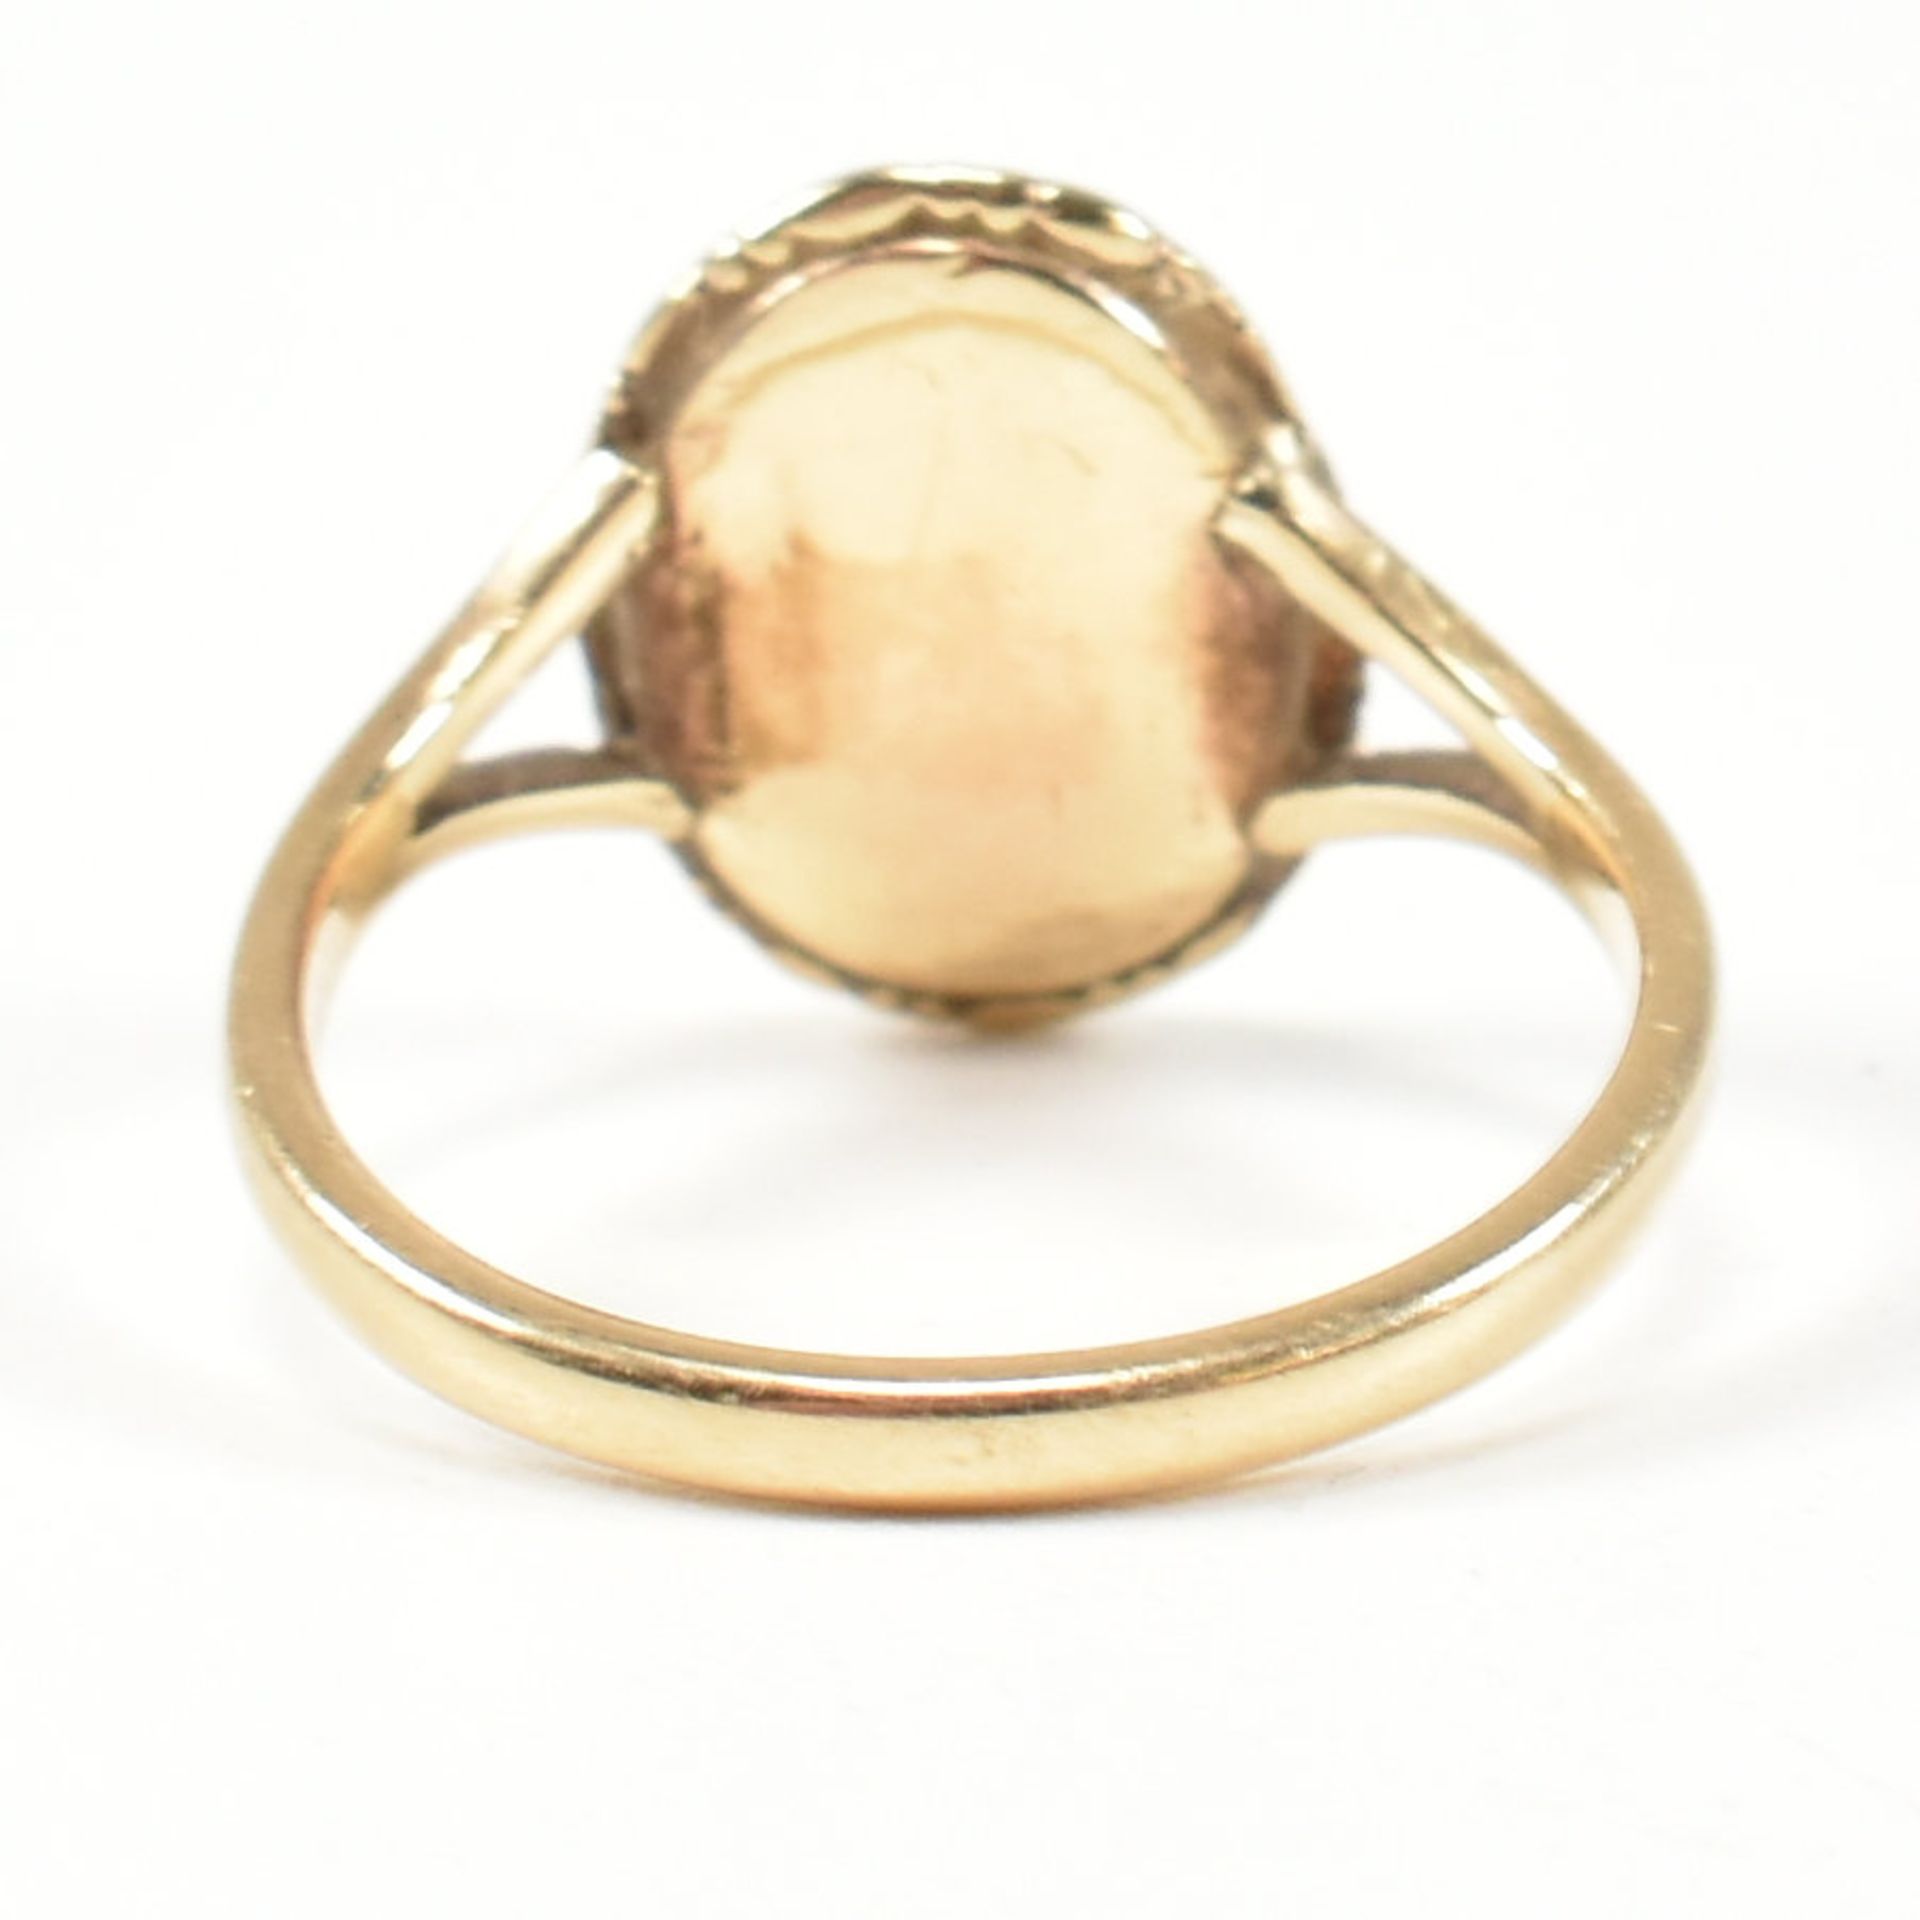 19TH CENTURY GOLD CAMEO RING - Image 5 of 6